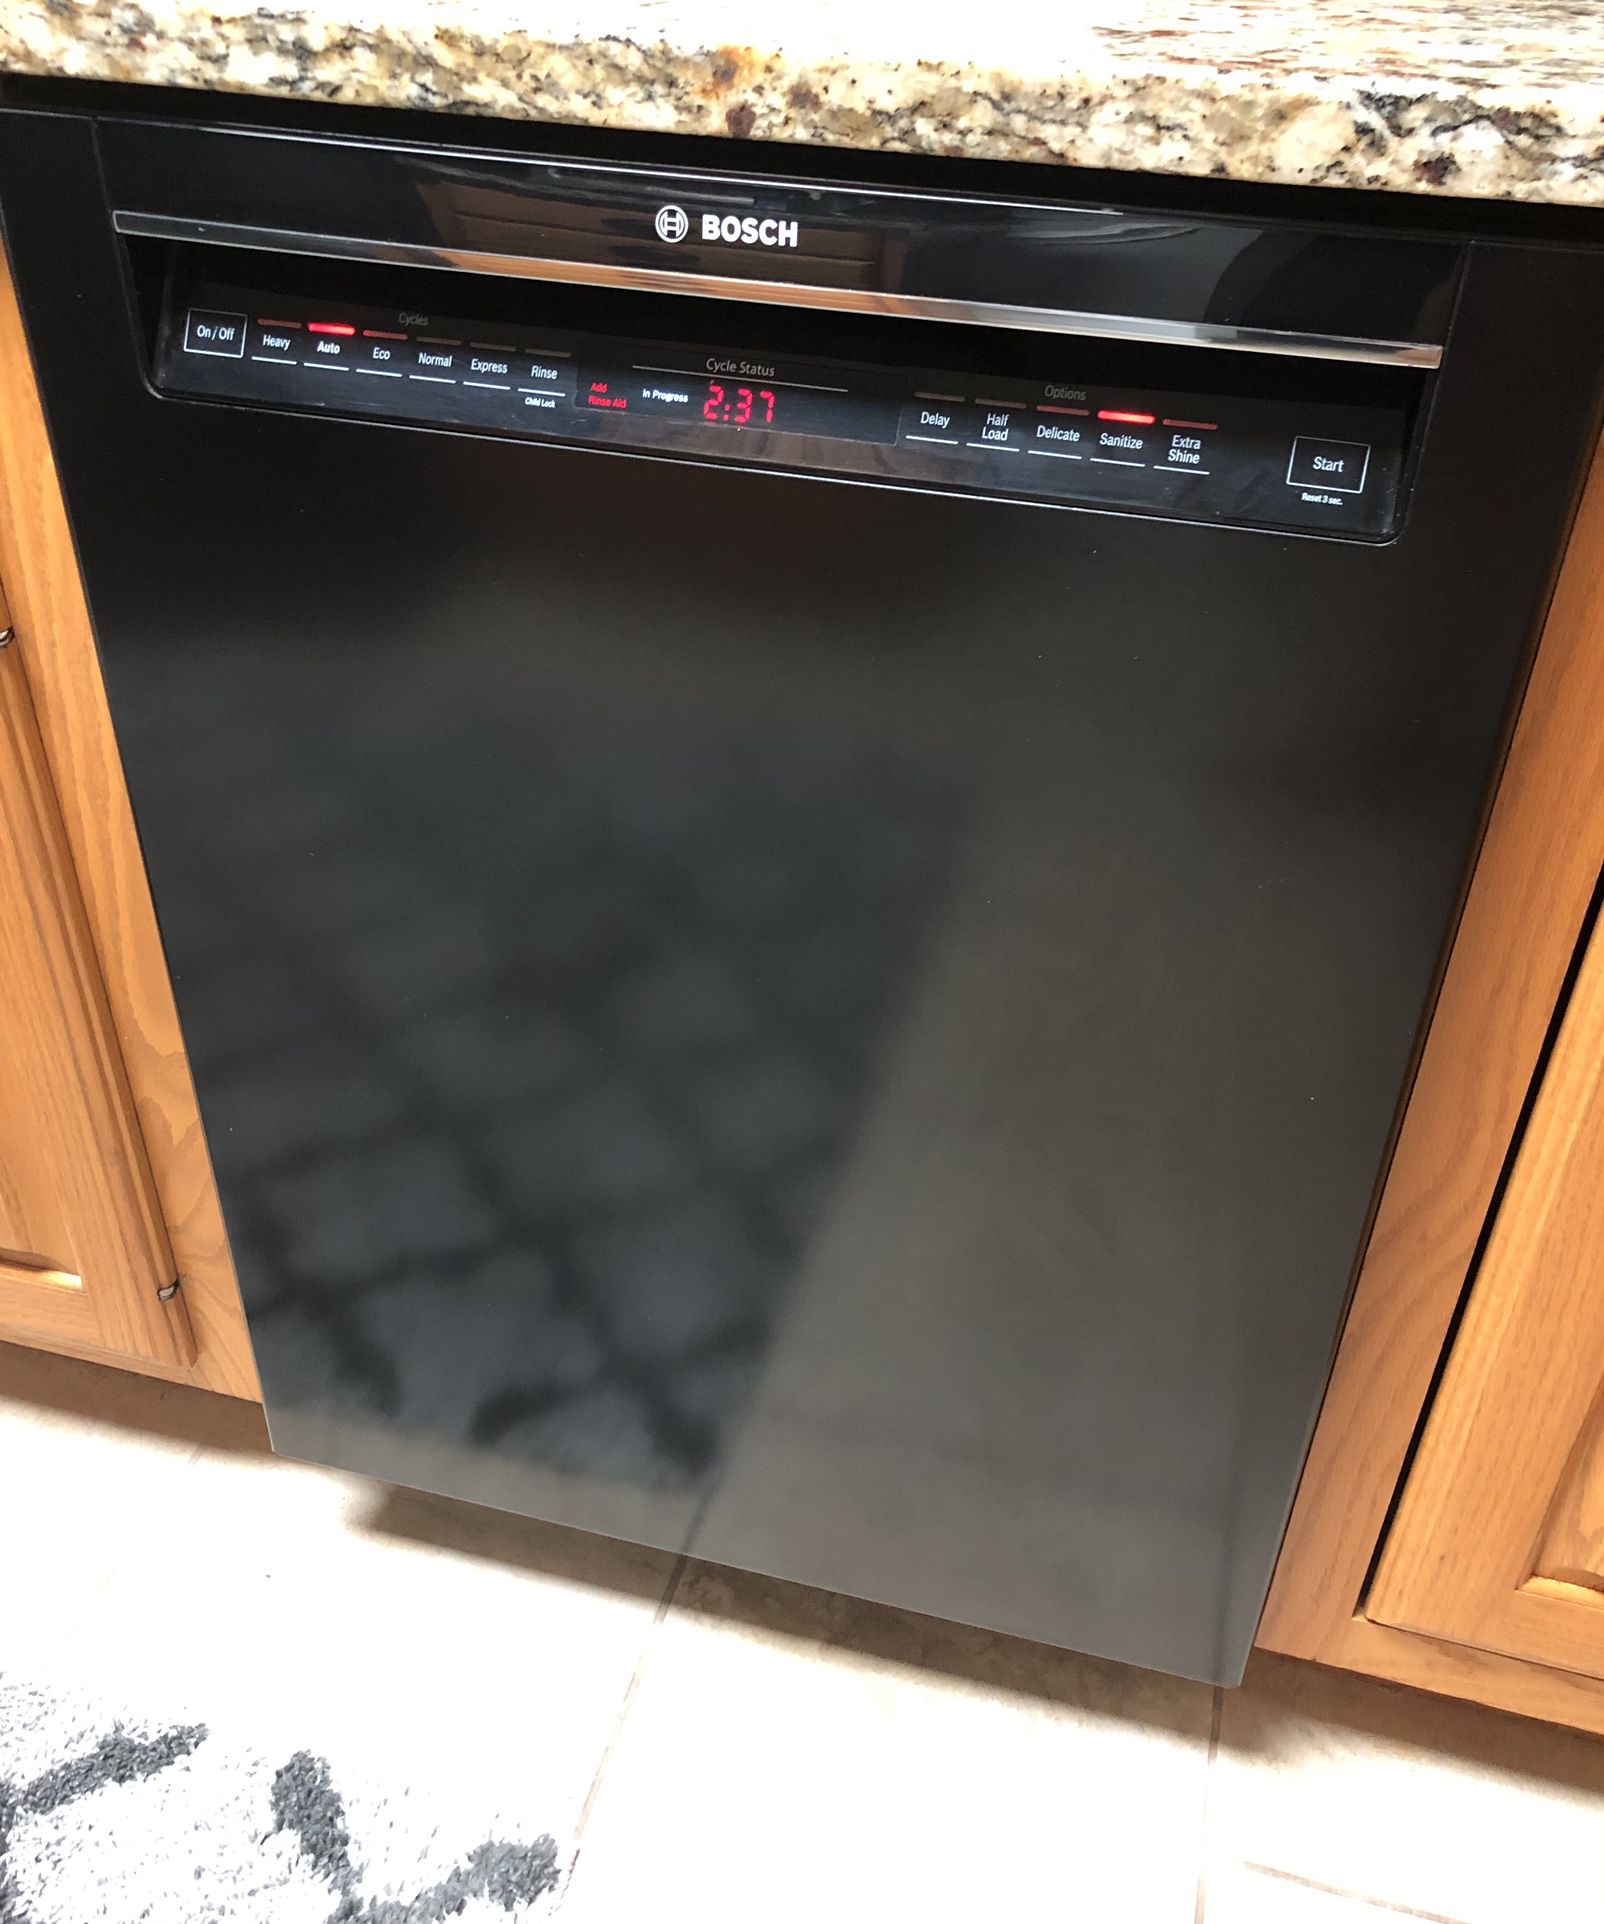 Bosch 800 Series SHE68T56UC Dishwasher with 3rd Rack, 44 dBA